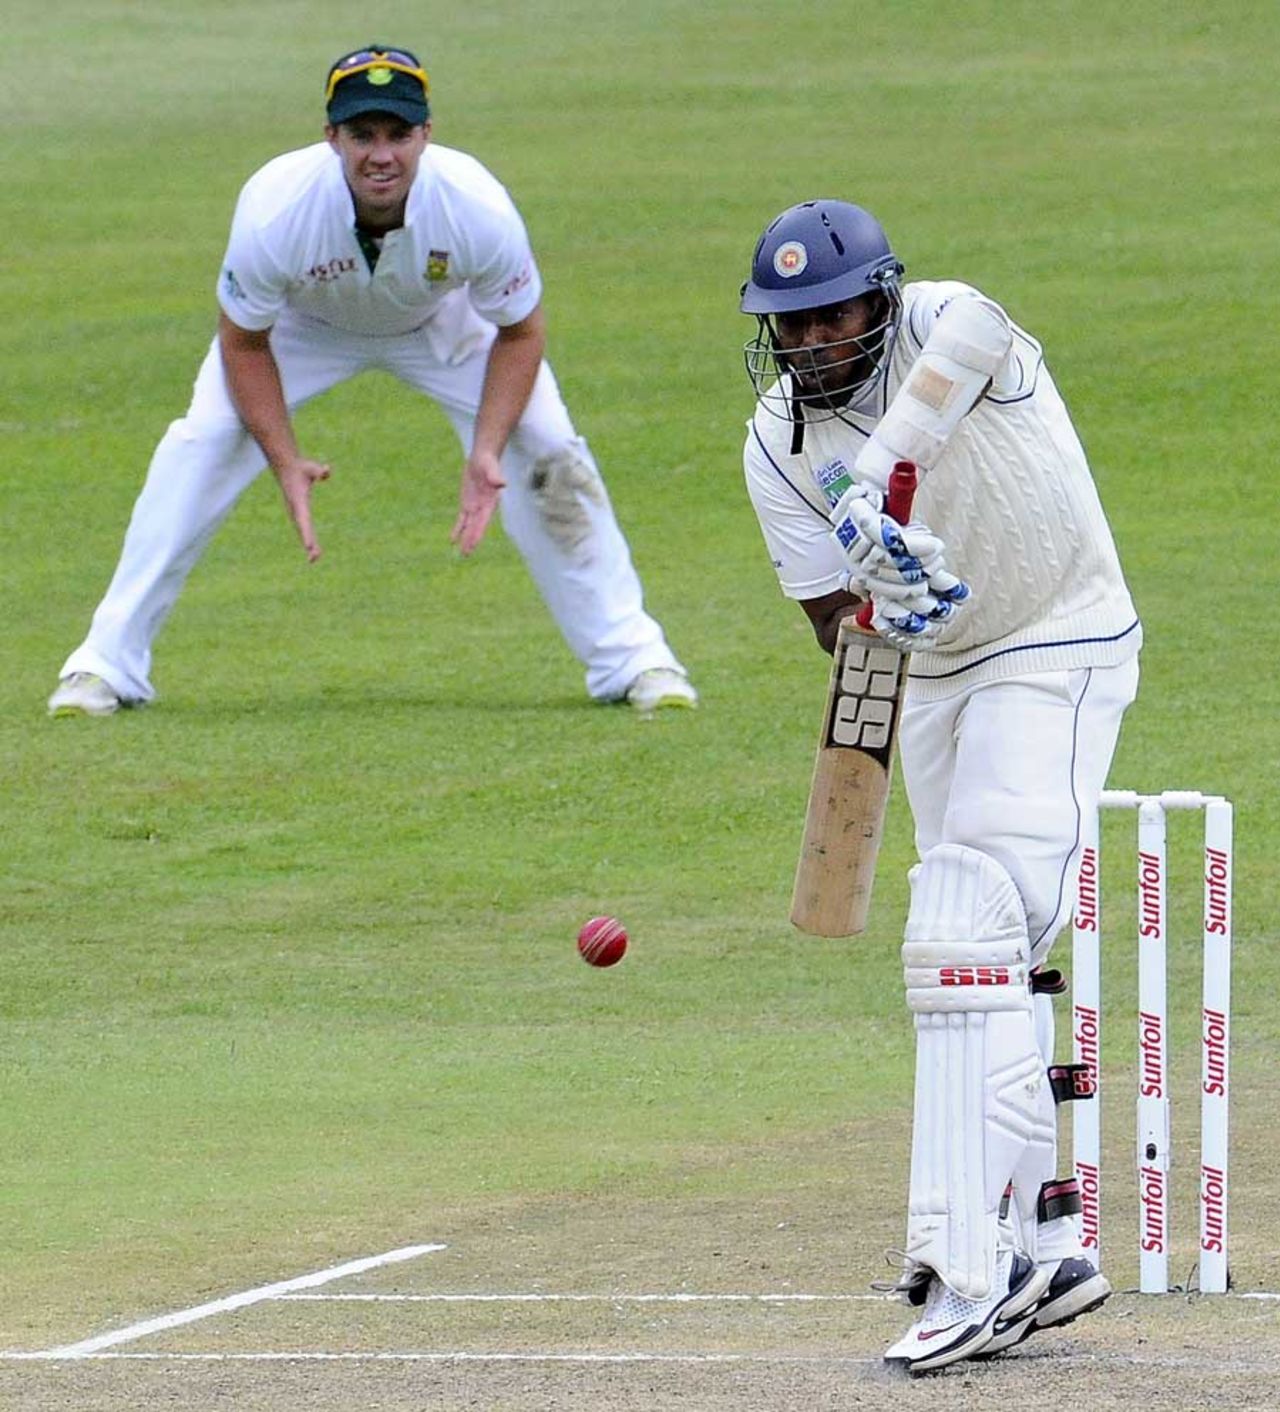 Thilan Samaraweera gets on the back foot to defend, South Africa v Sri Lanka, 2nd Test, Durban, 3rd day, December 28, 2011